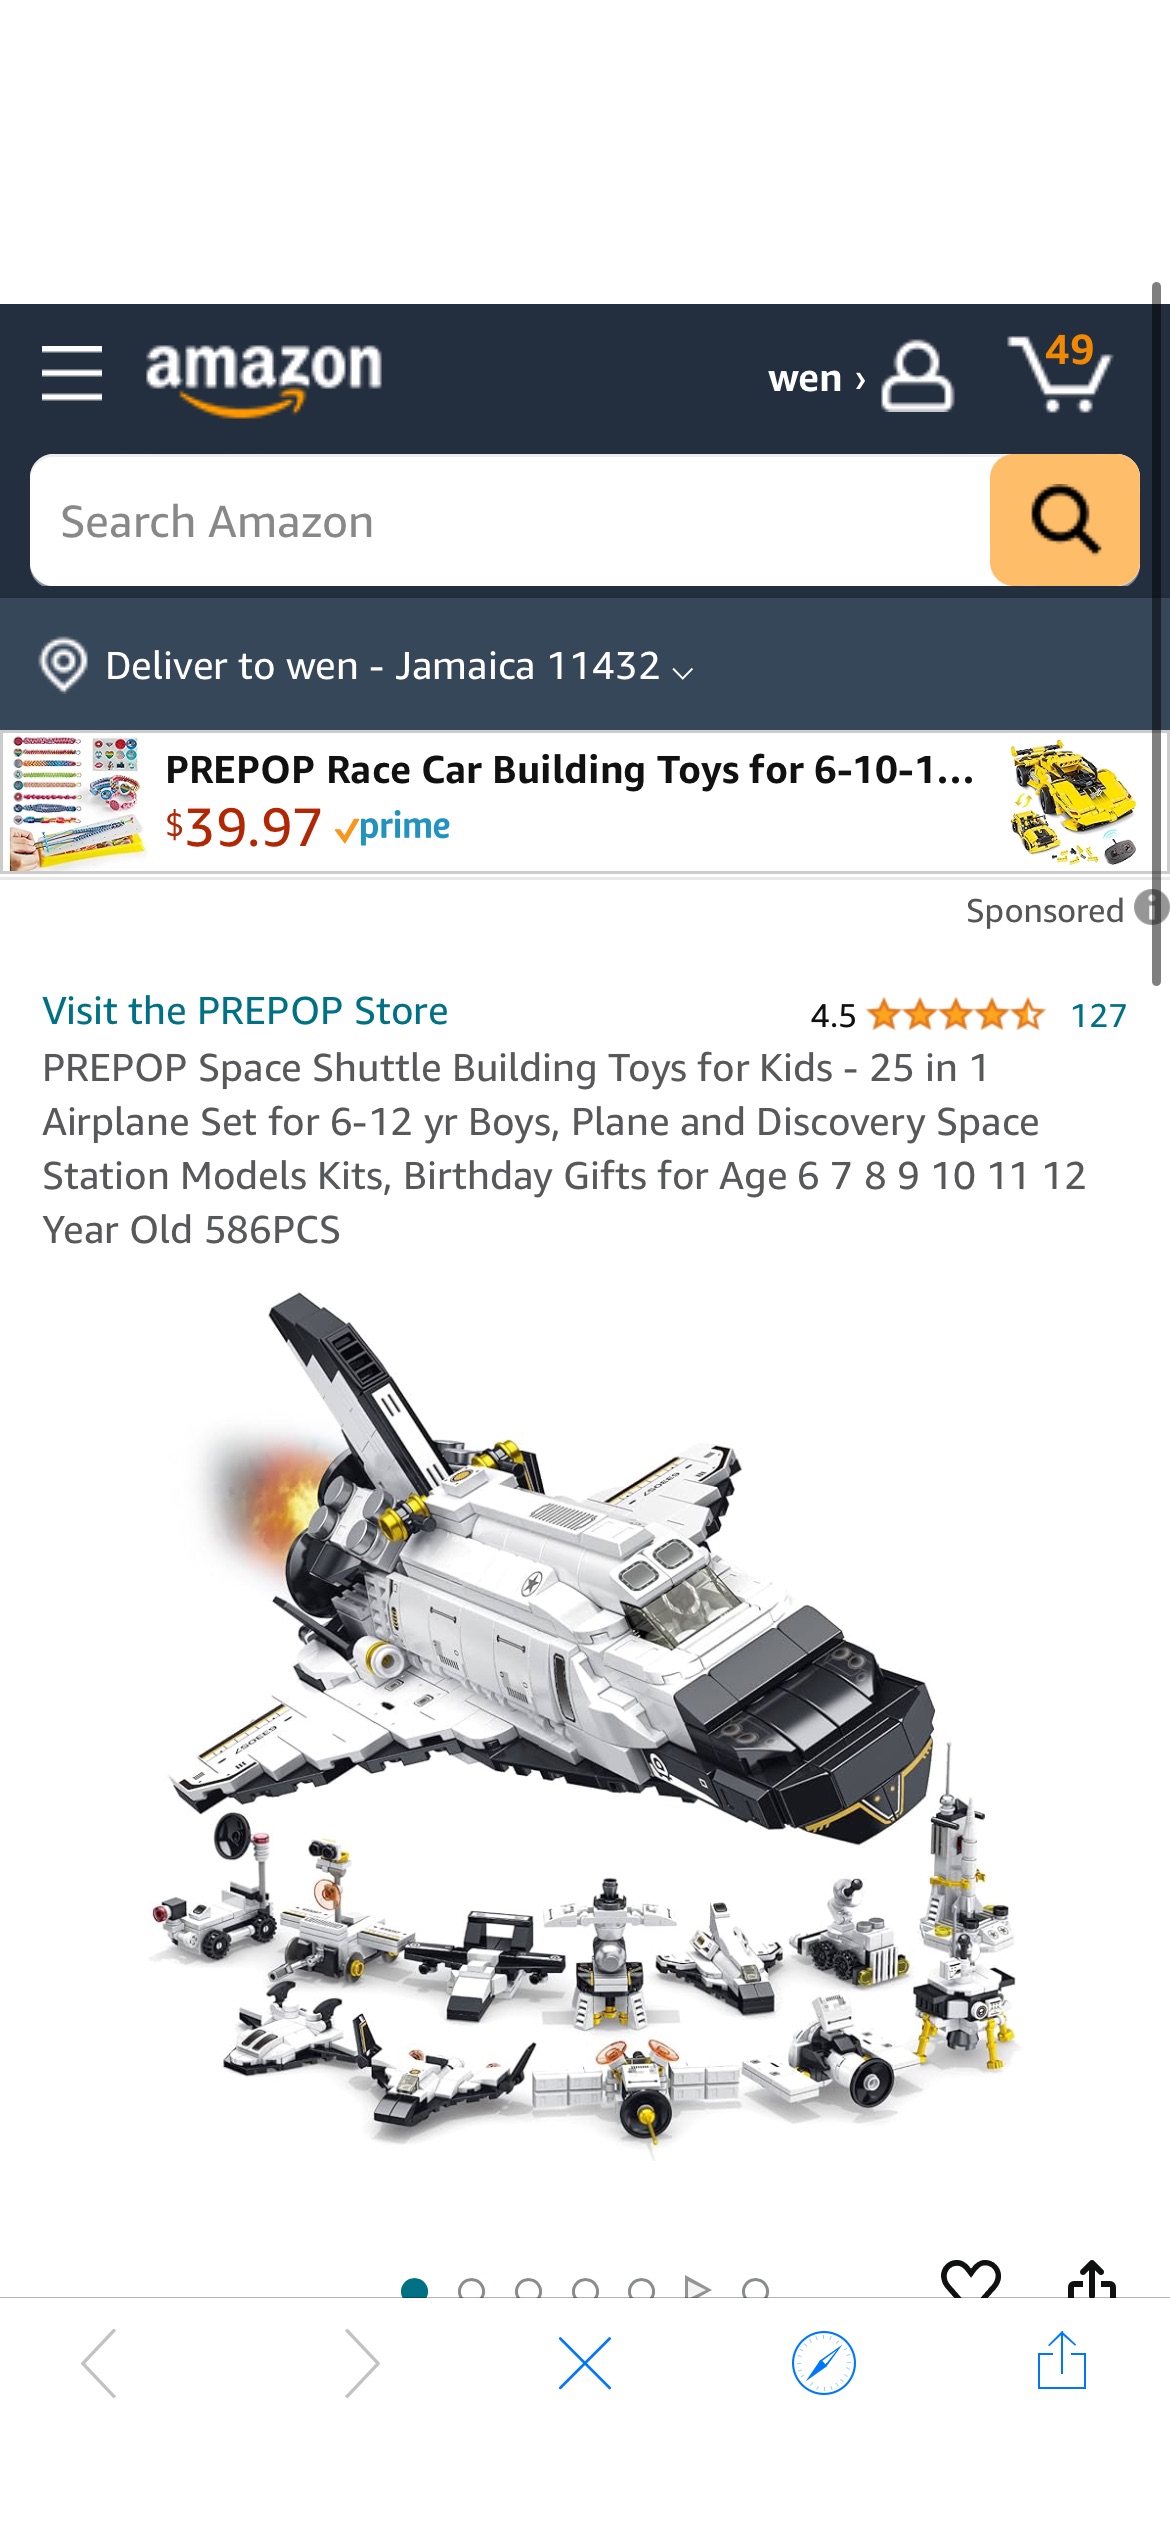 Amazon.com: PREPOP Space Shuttle Building Toys for Kids - 25 in 1 Airplane Set for 6-12 yr Boys, Plane and Discovery Space Station Models Kits, Birthday Gifts for Age 6 7 8 9 10 11 12 Year Old 586PCS 